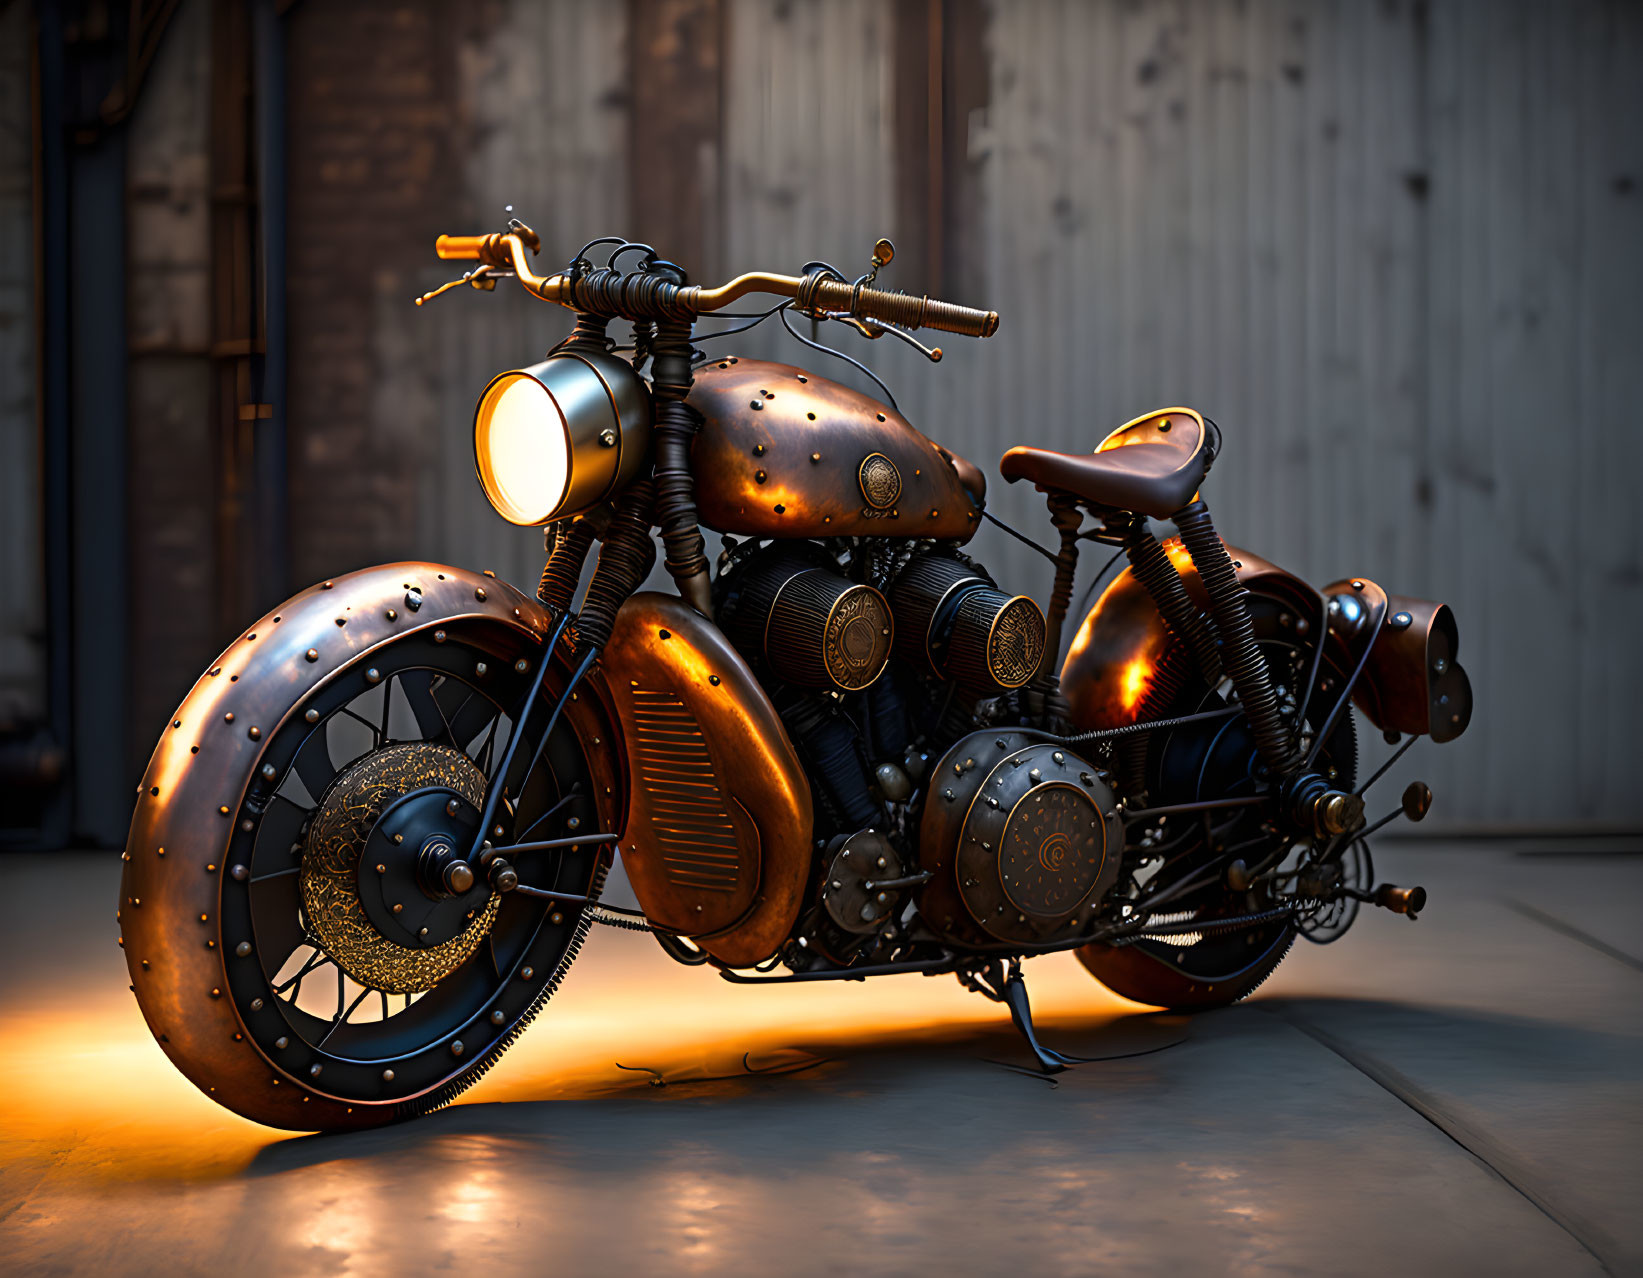 Steampunk Motorcycle with Copper and Brass Finishes in Warehouse Setting